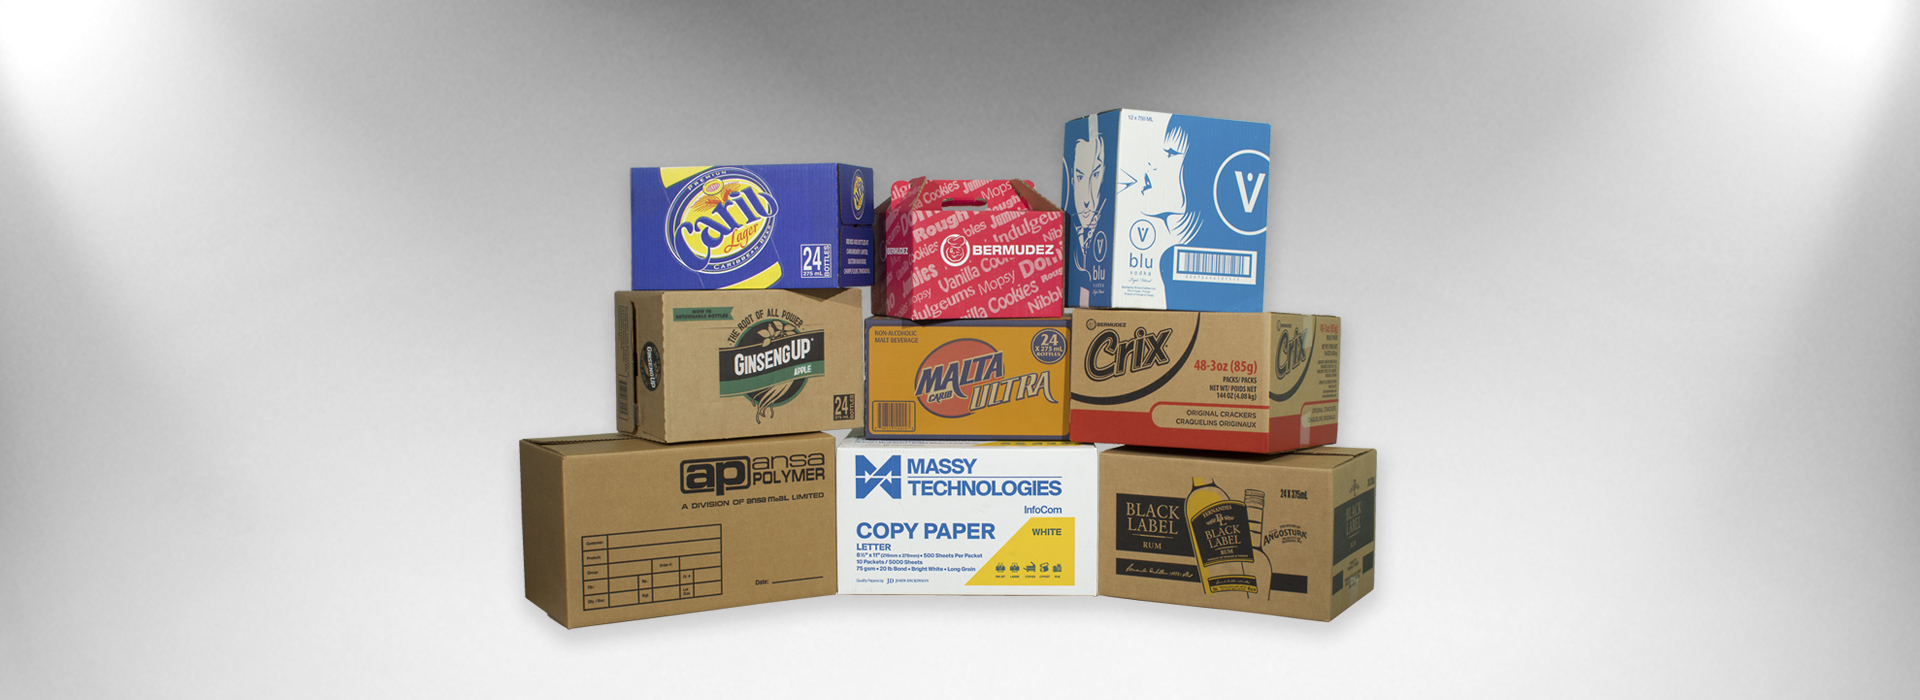 Caribbean Packaging Industries » Products